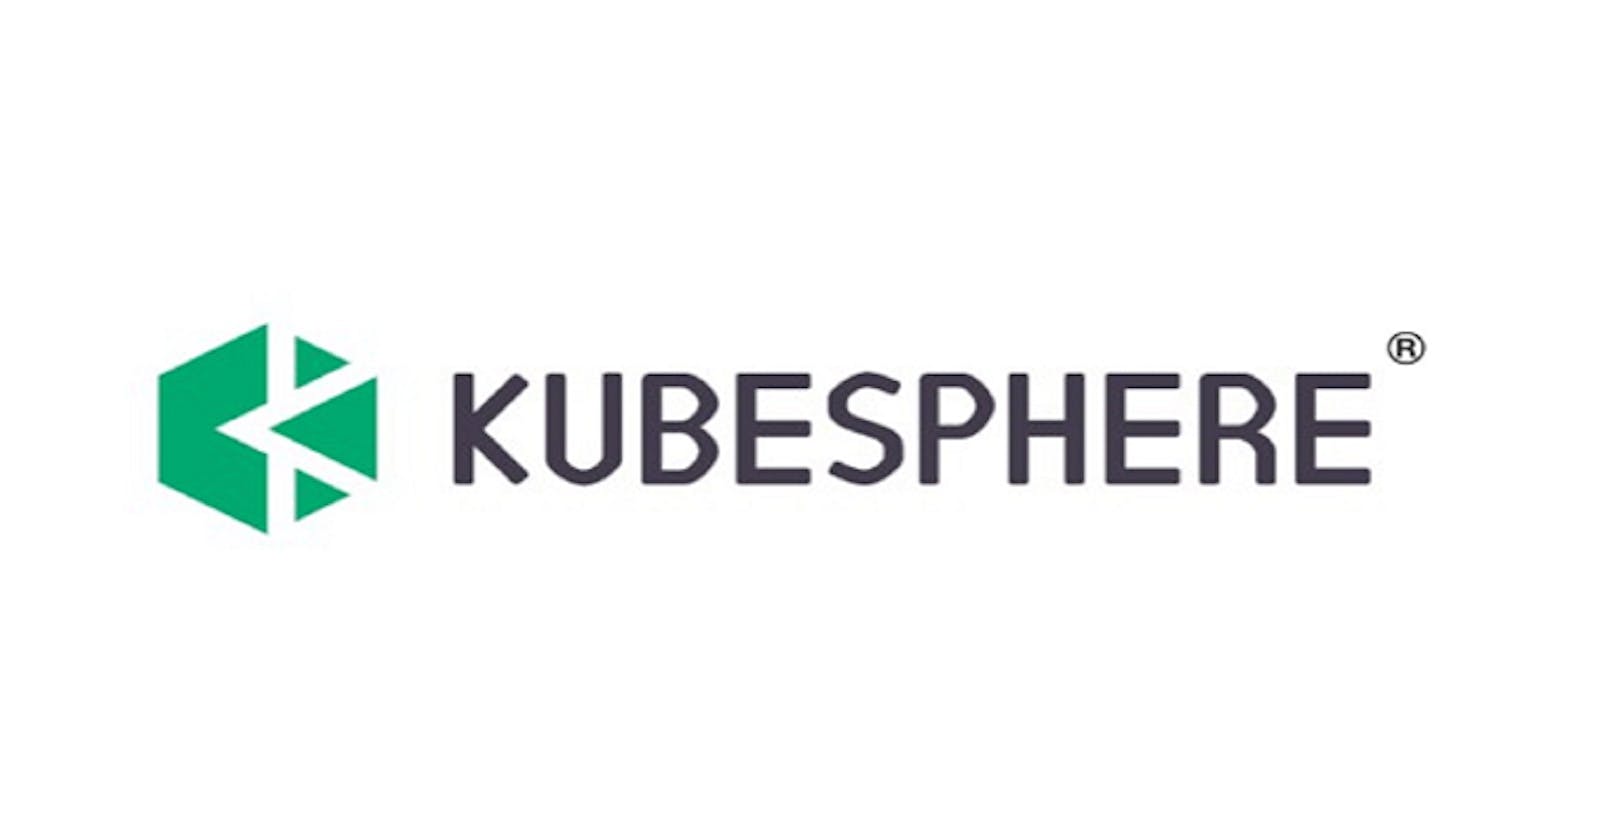 Getting Started with KubeSphere